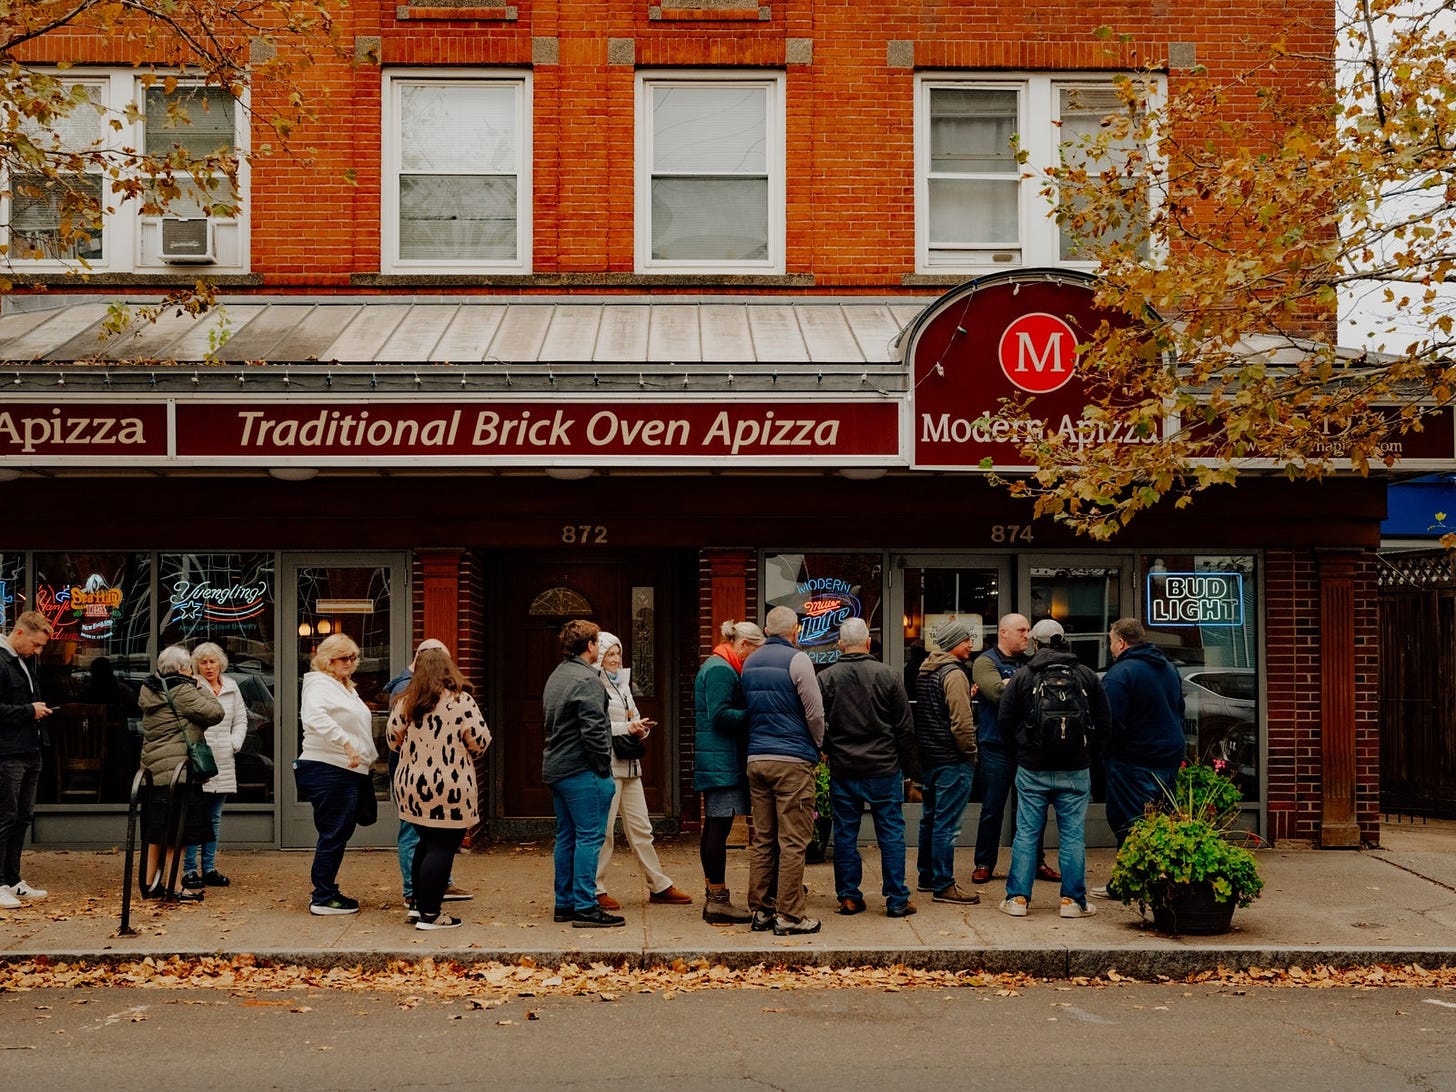 A line of people waiting outside Modern Apizza.